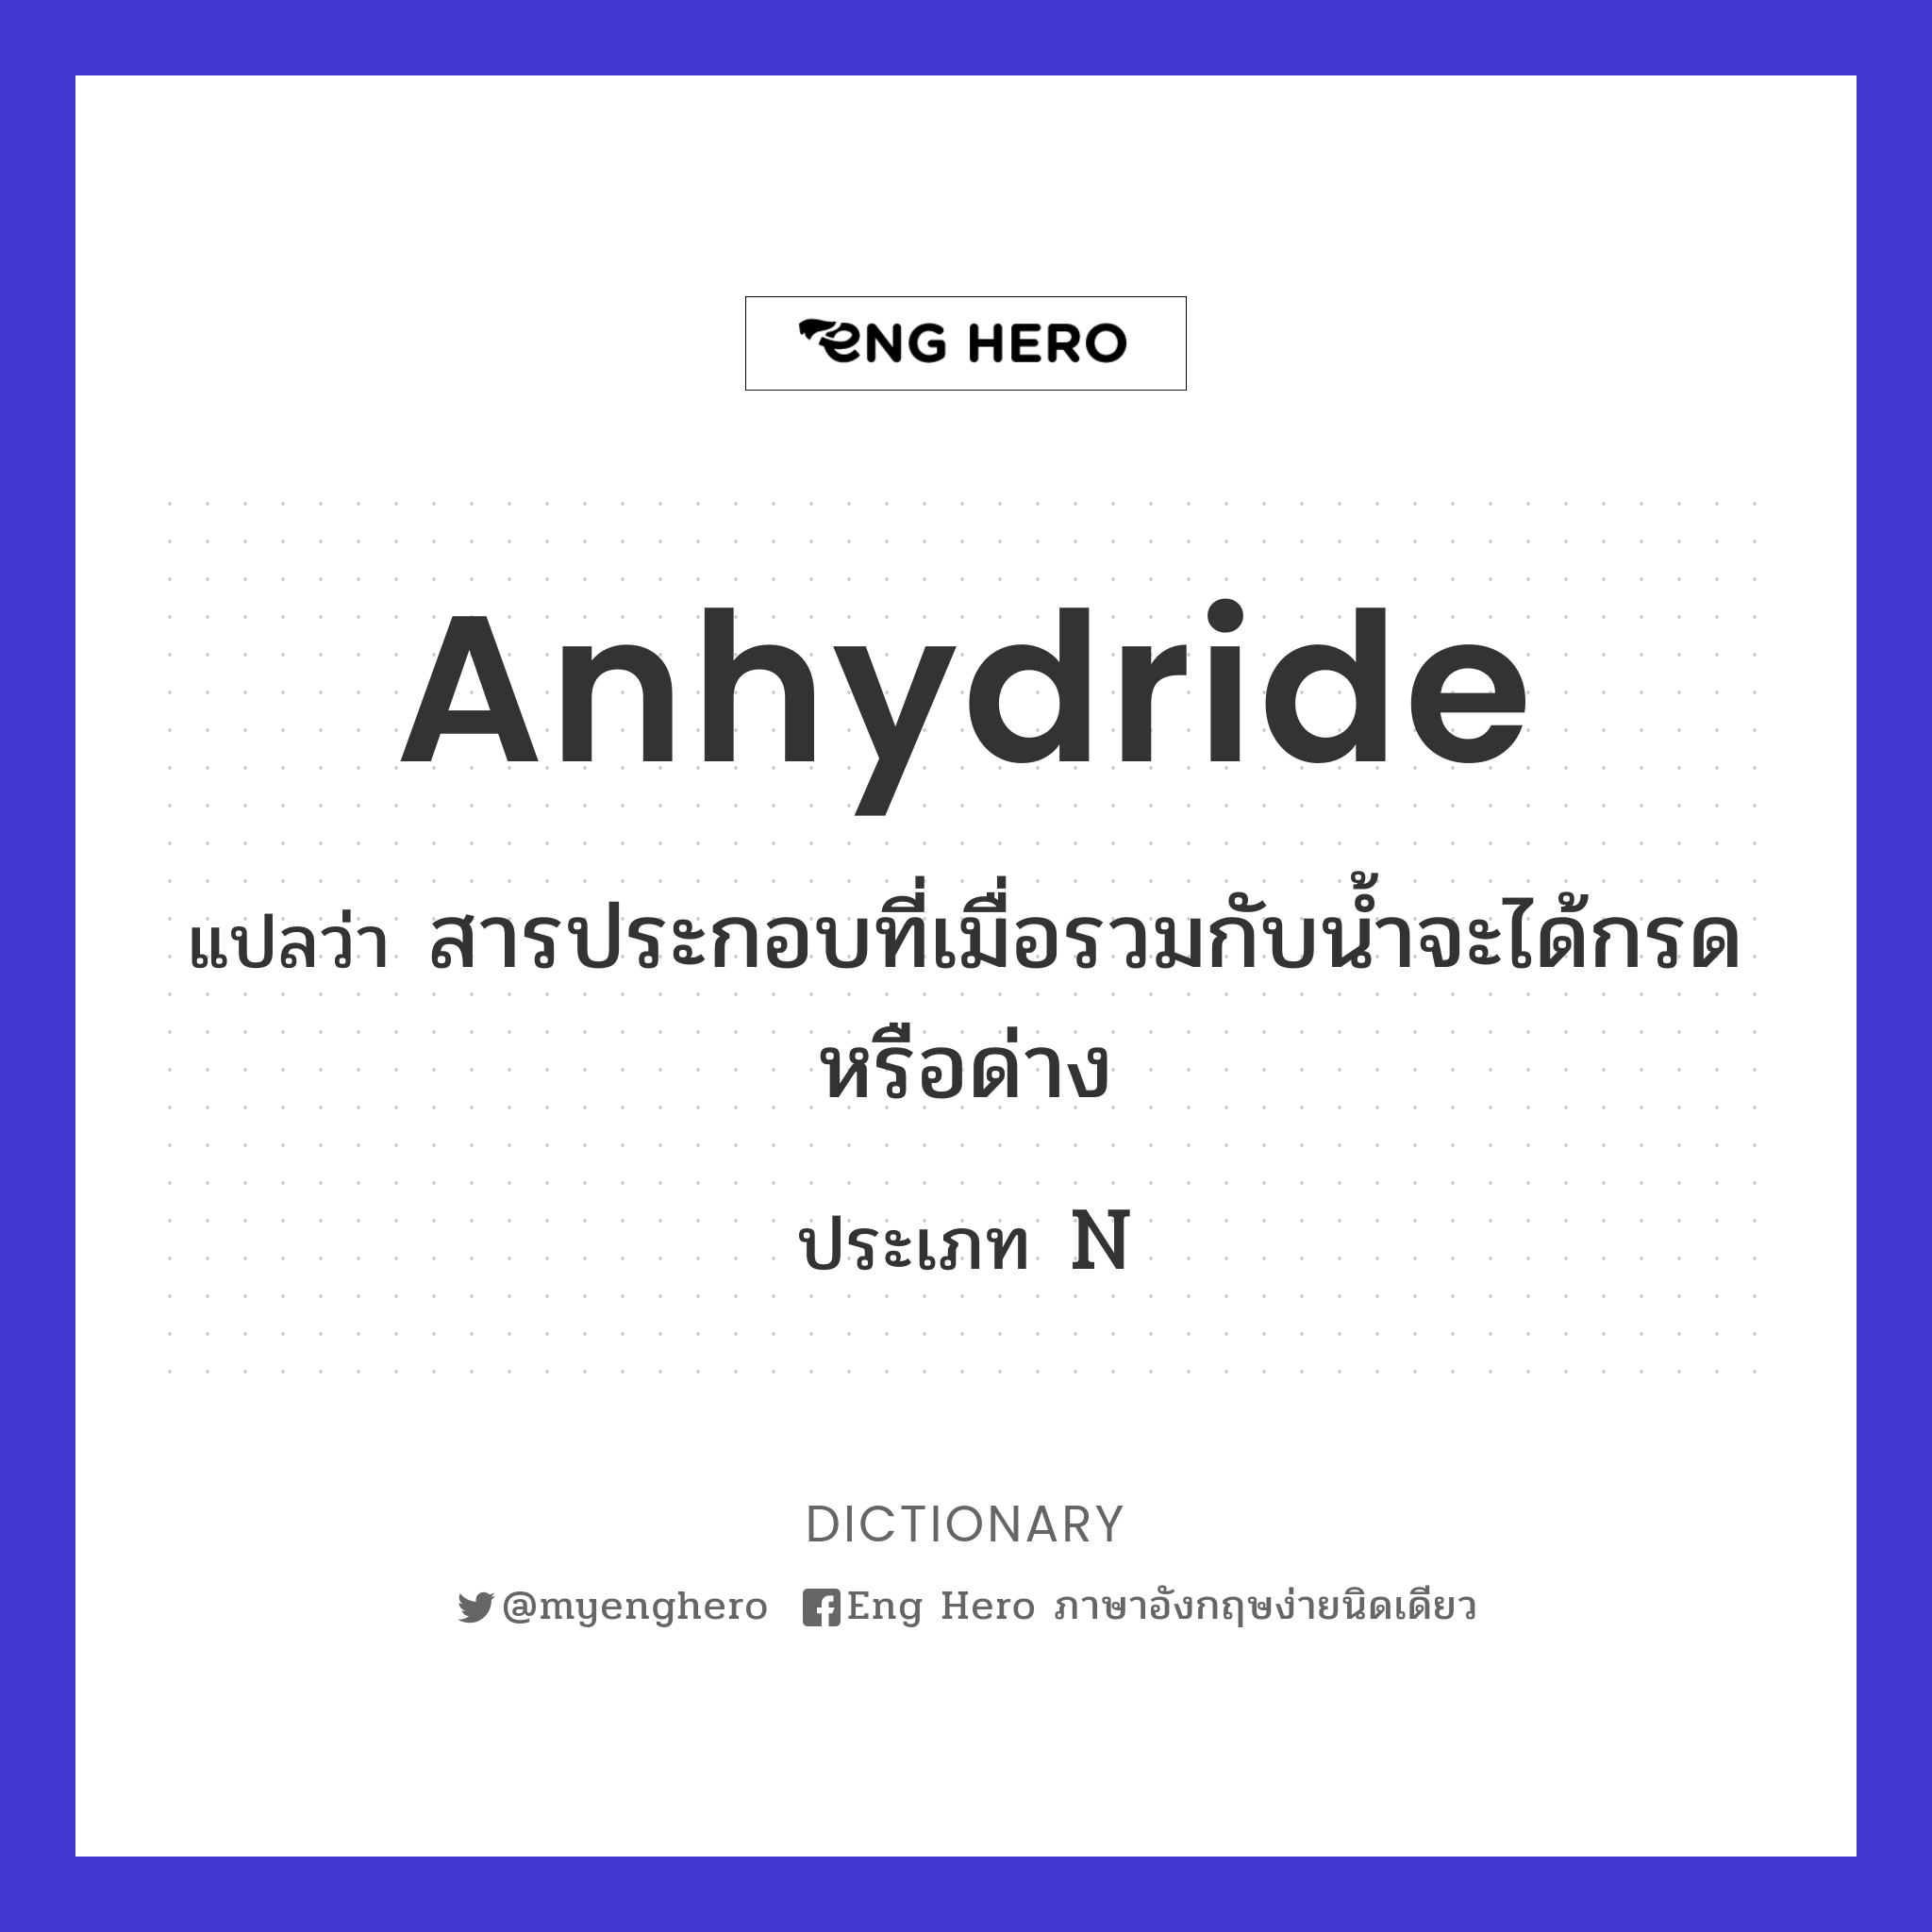 anhydride